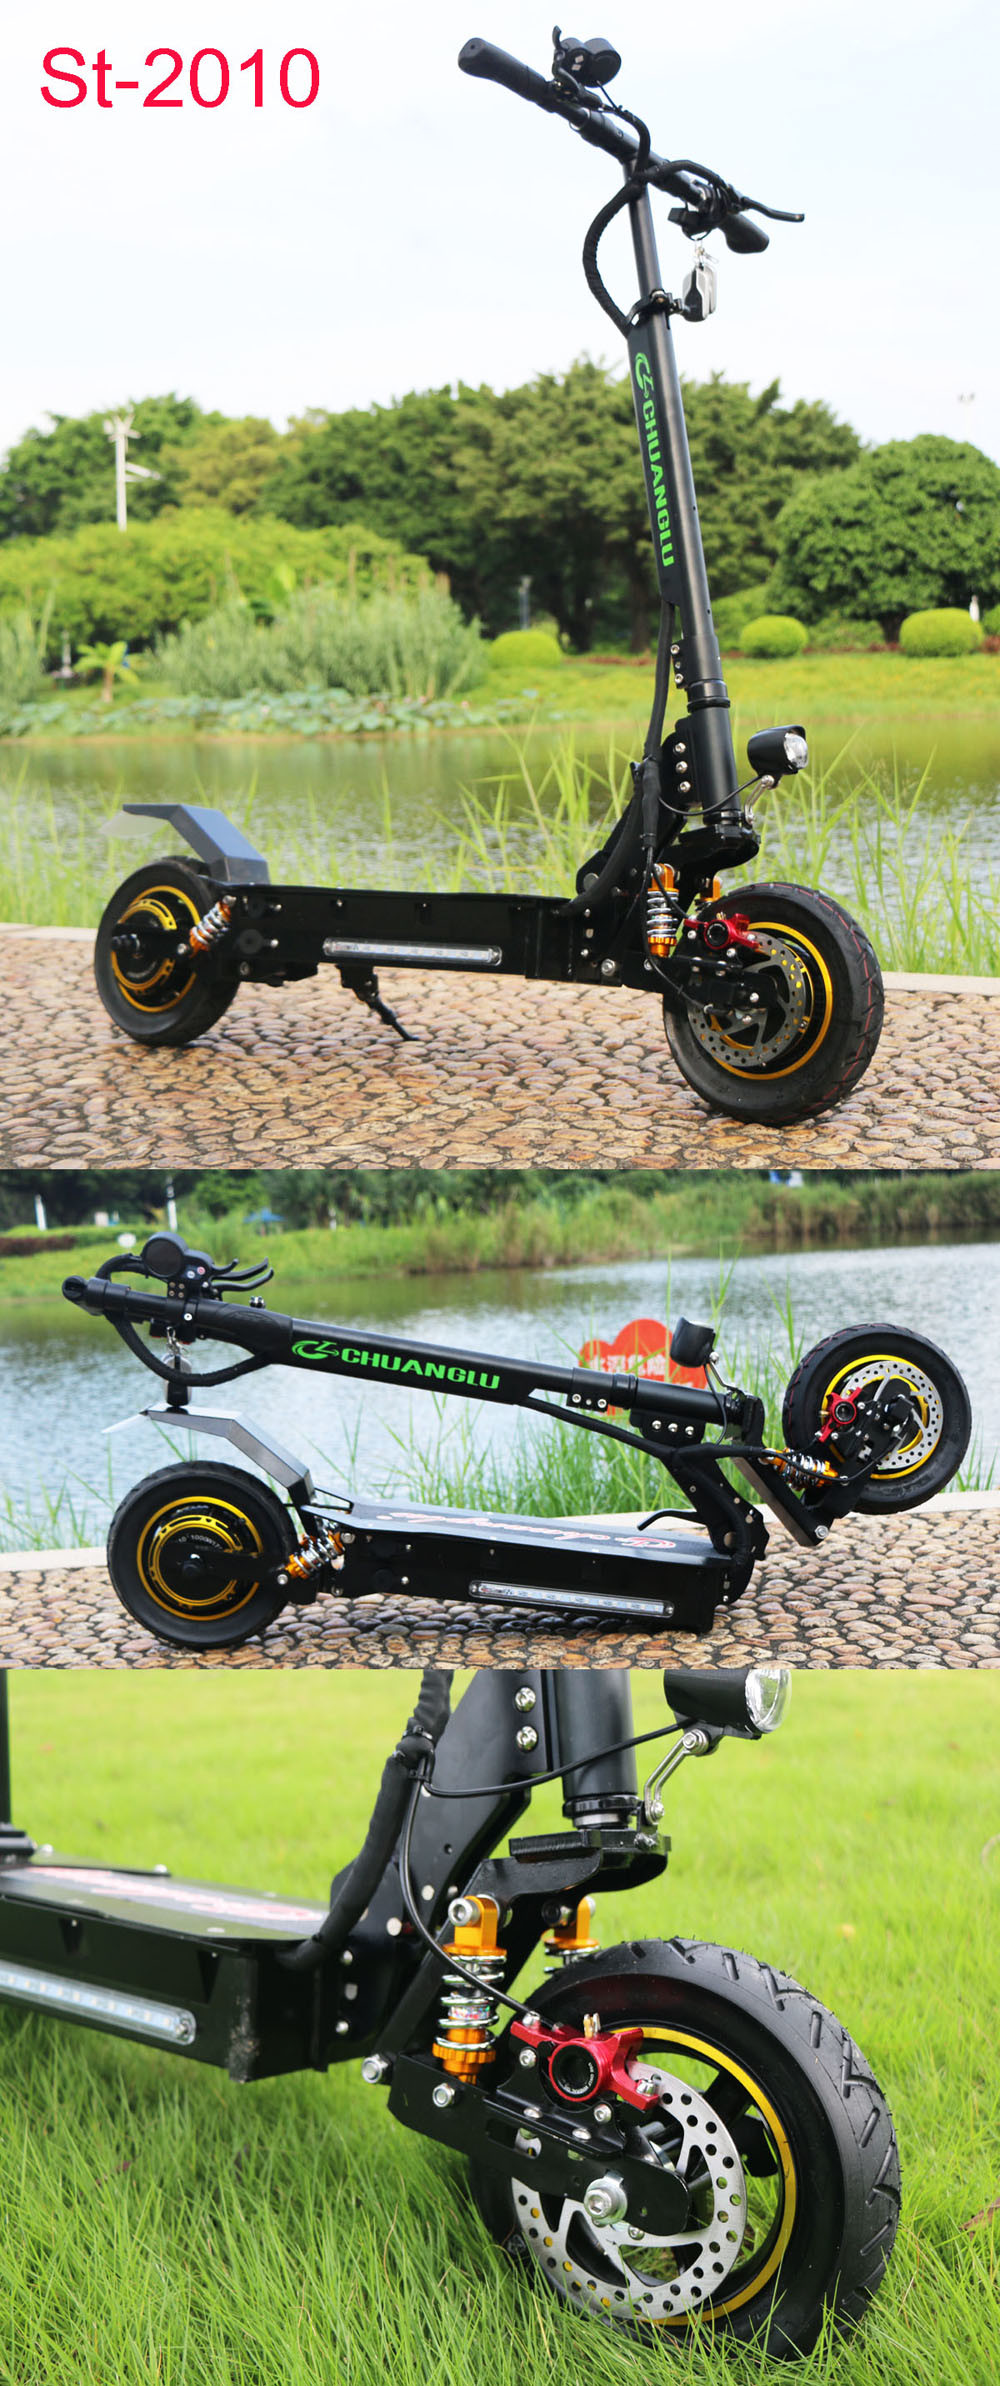 Koowheel Electro Scooter Self Balancing Two Wheeler Electric Scooter for Adults